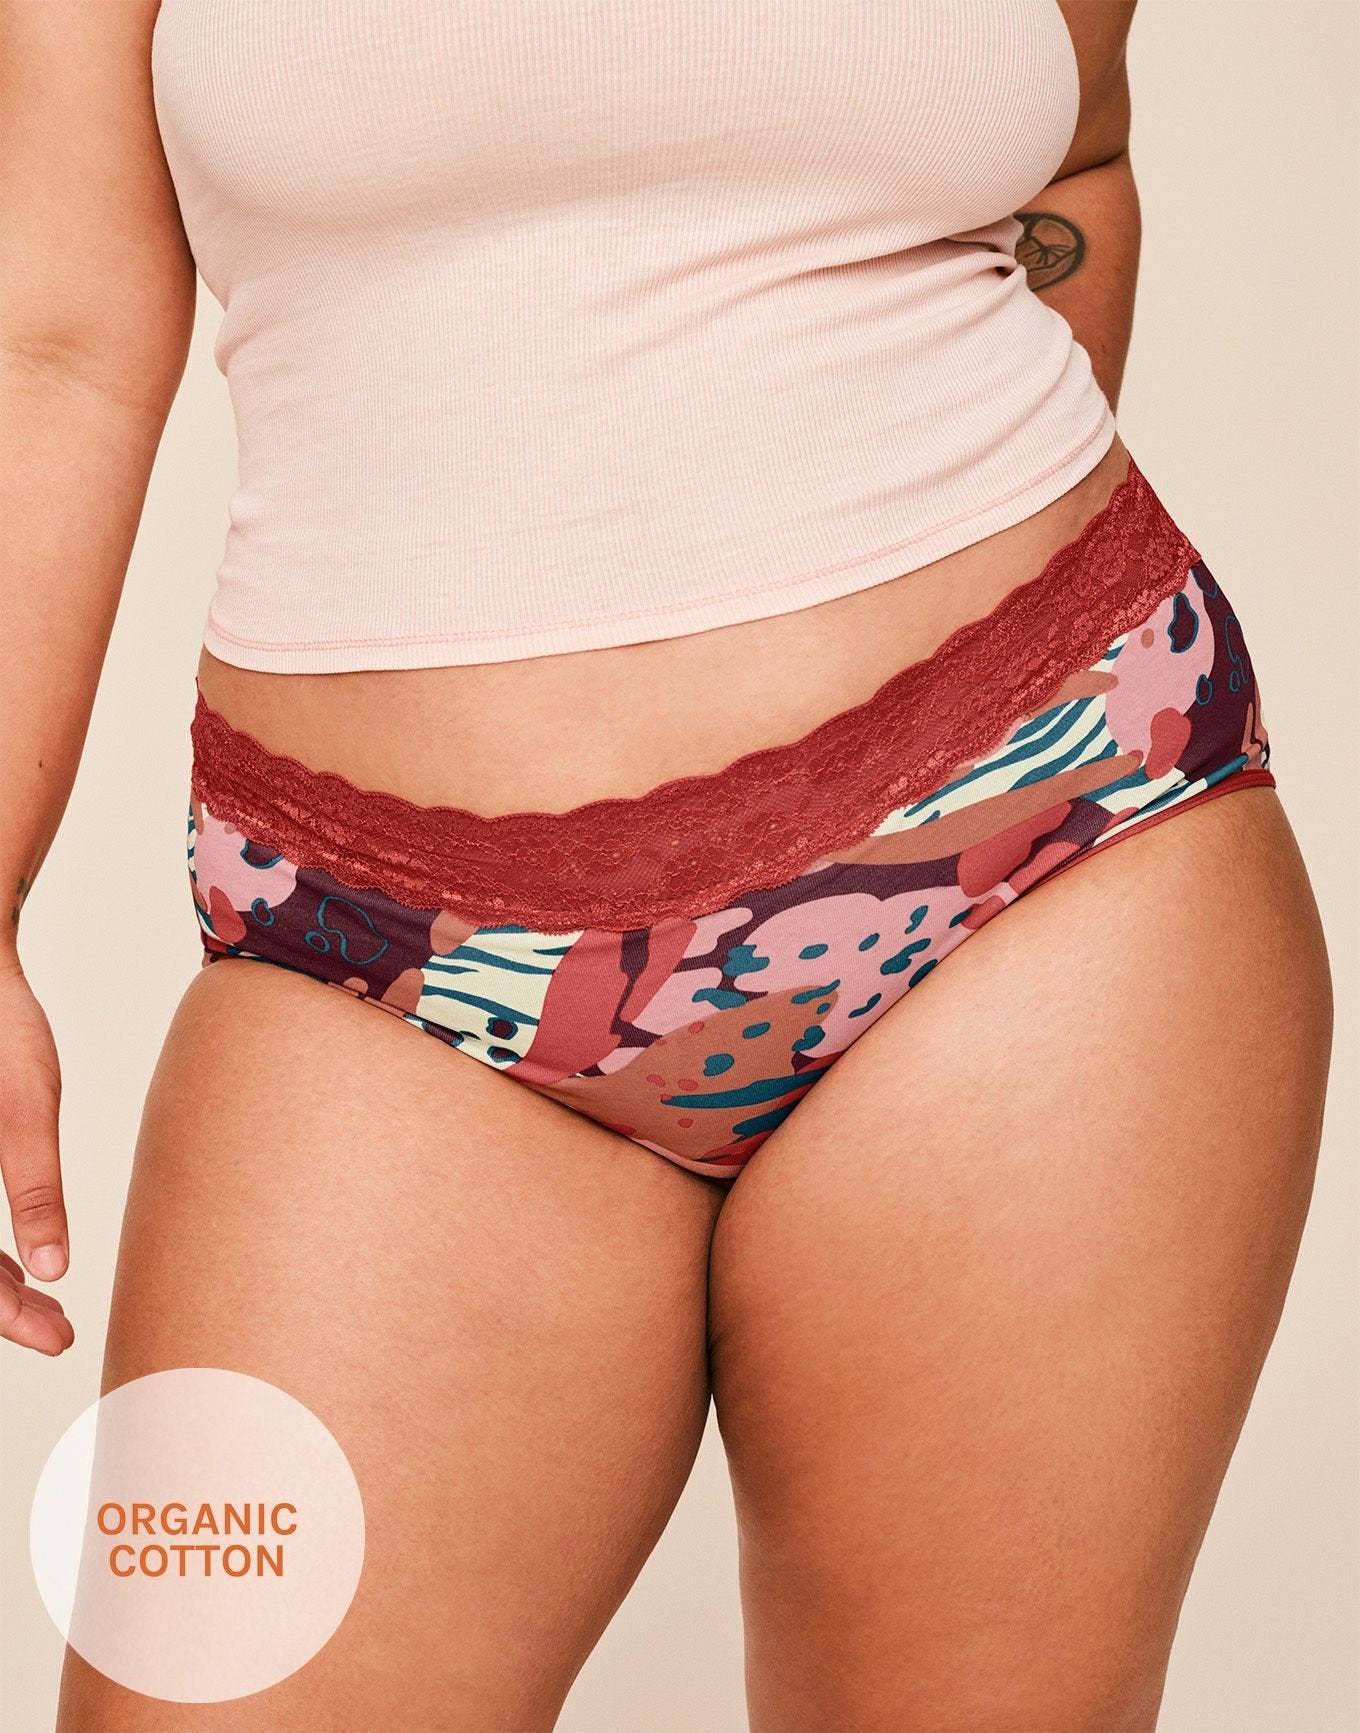 Parade Underwear Review - The Wild Woman